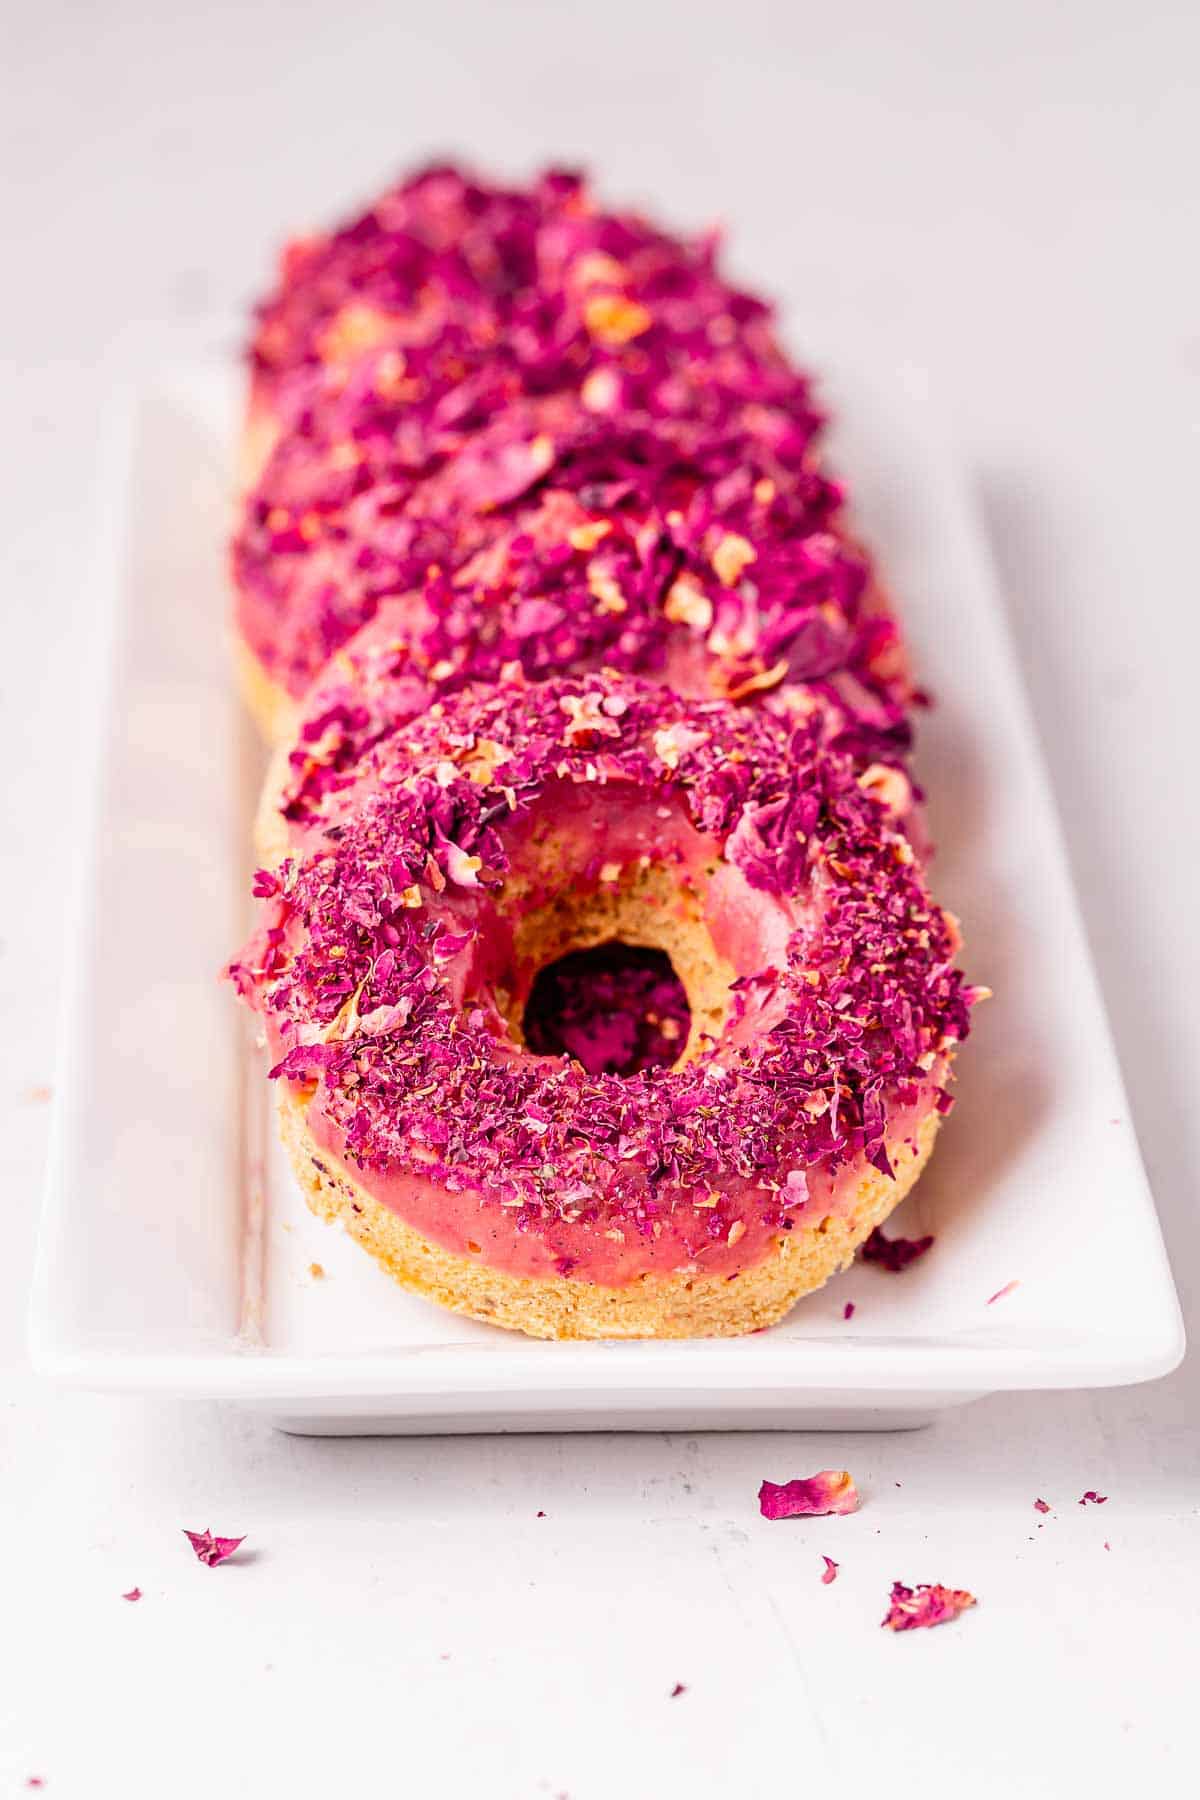 A long platter of lemon donuts topped with pink frosting and culinary rose petals.